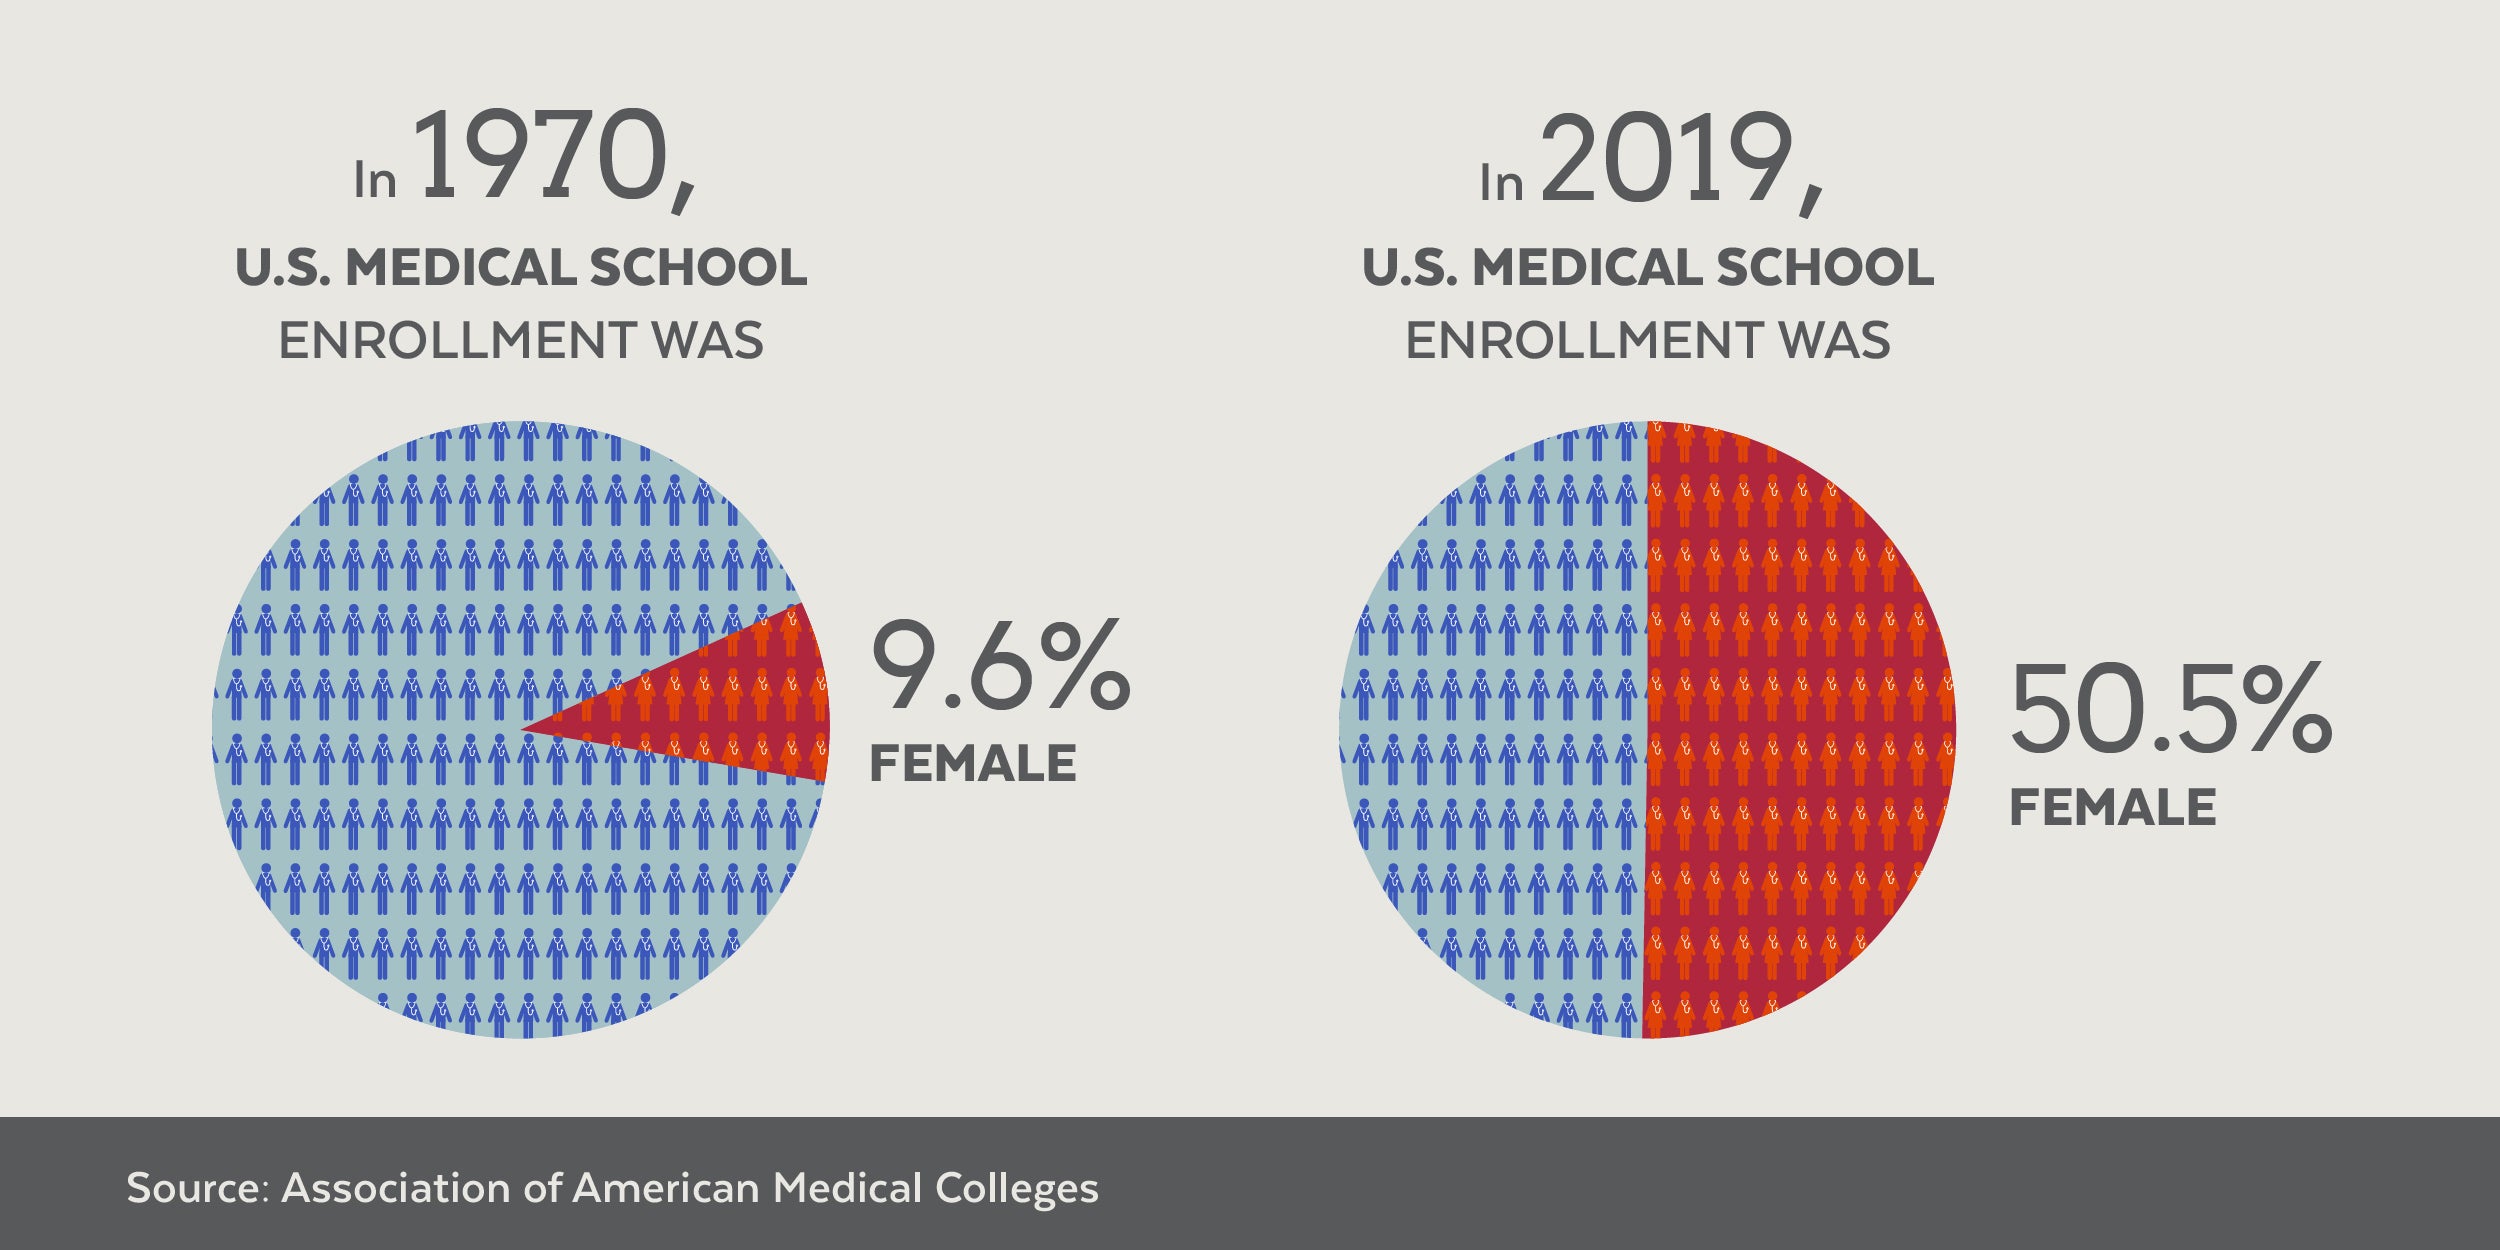 In 1970, U.S. medical school enrollment was 9.6% female. In 2019, it was 50.5% female. (Source: Association of American Medical Colleges)